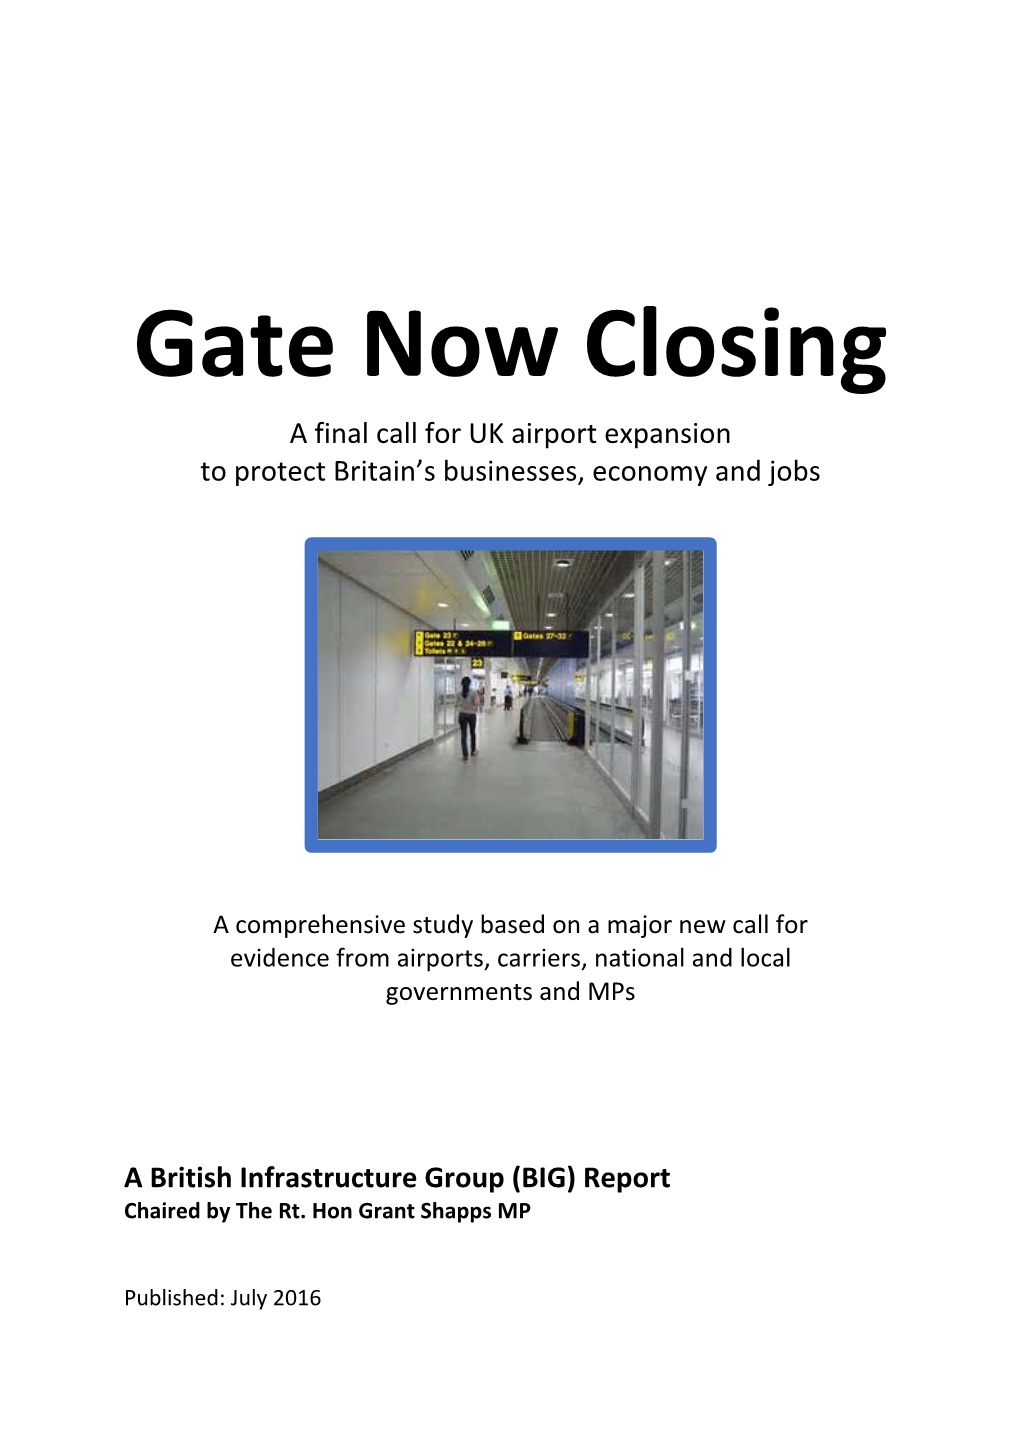 Gate Now Closing a Final Call for UK Airport Expansion to Protect Britain’S Businesses, Economy and Jobs